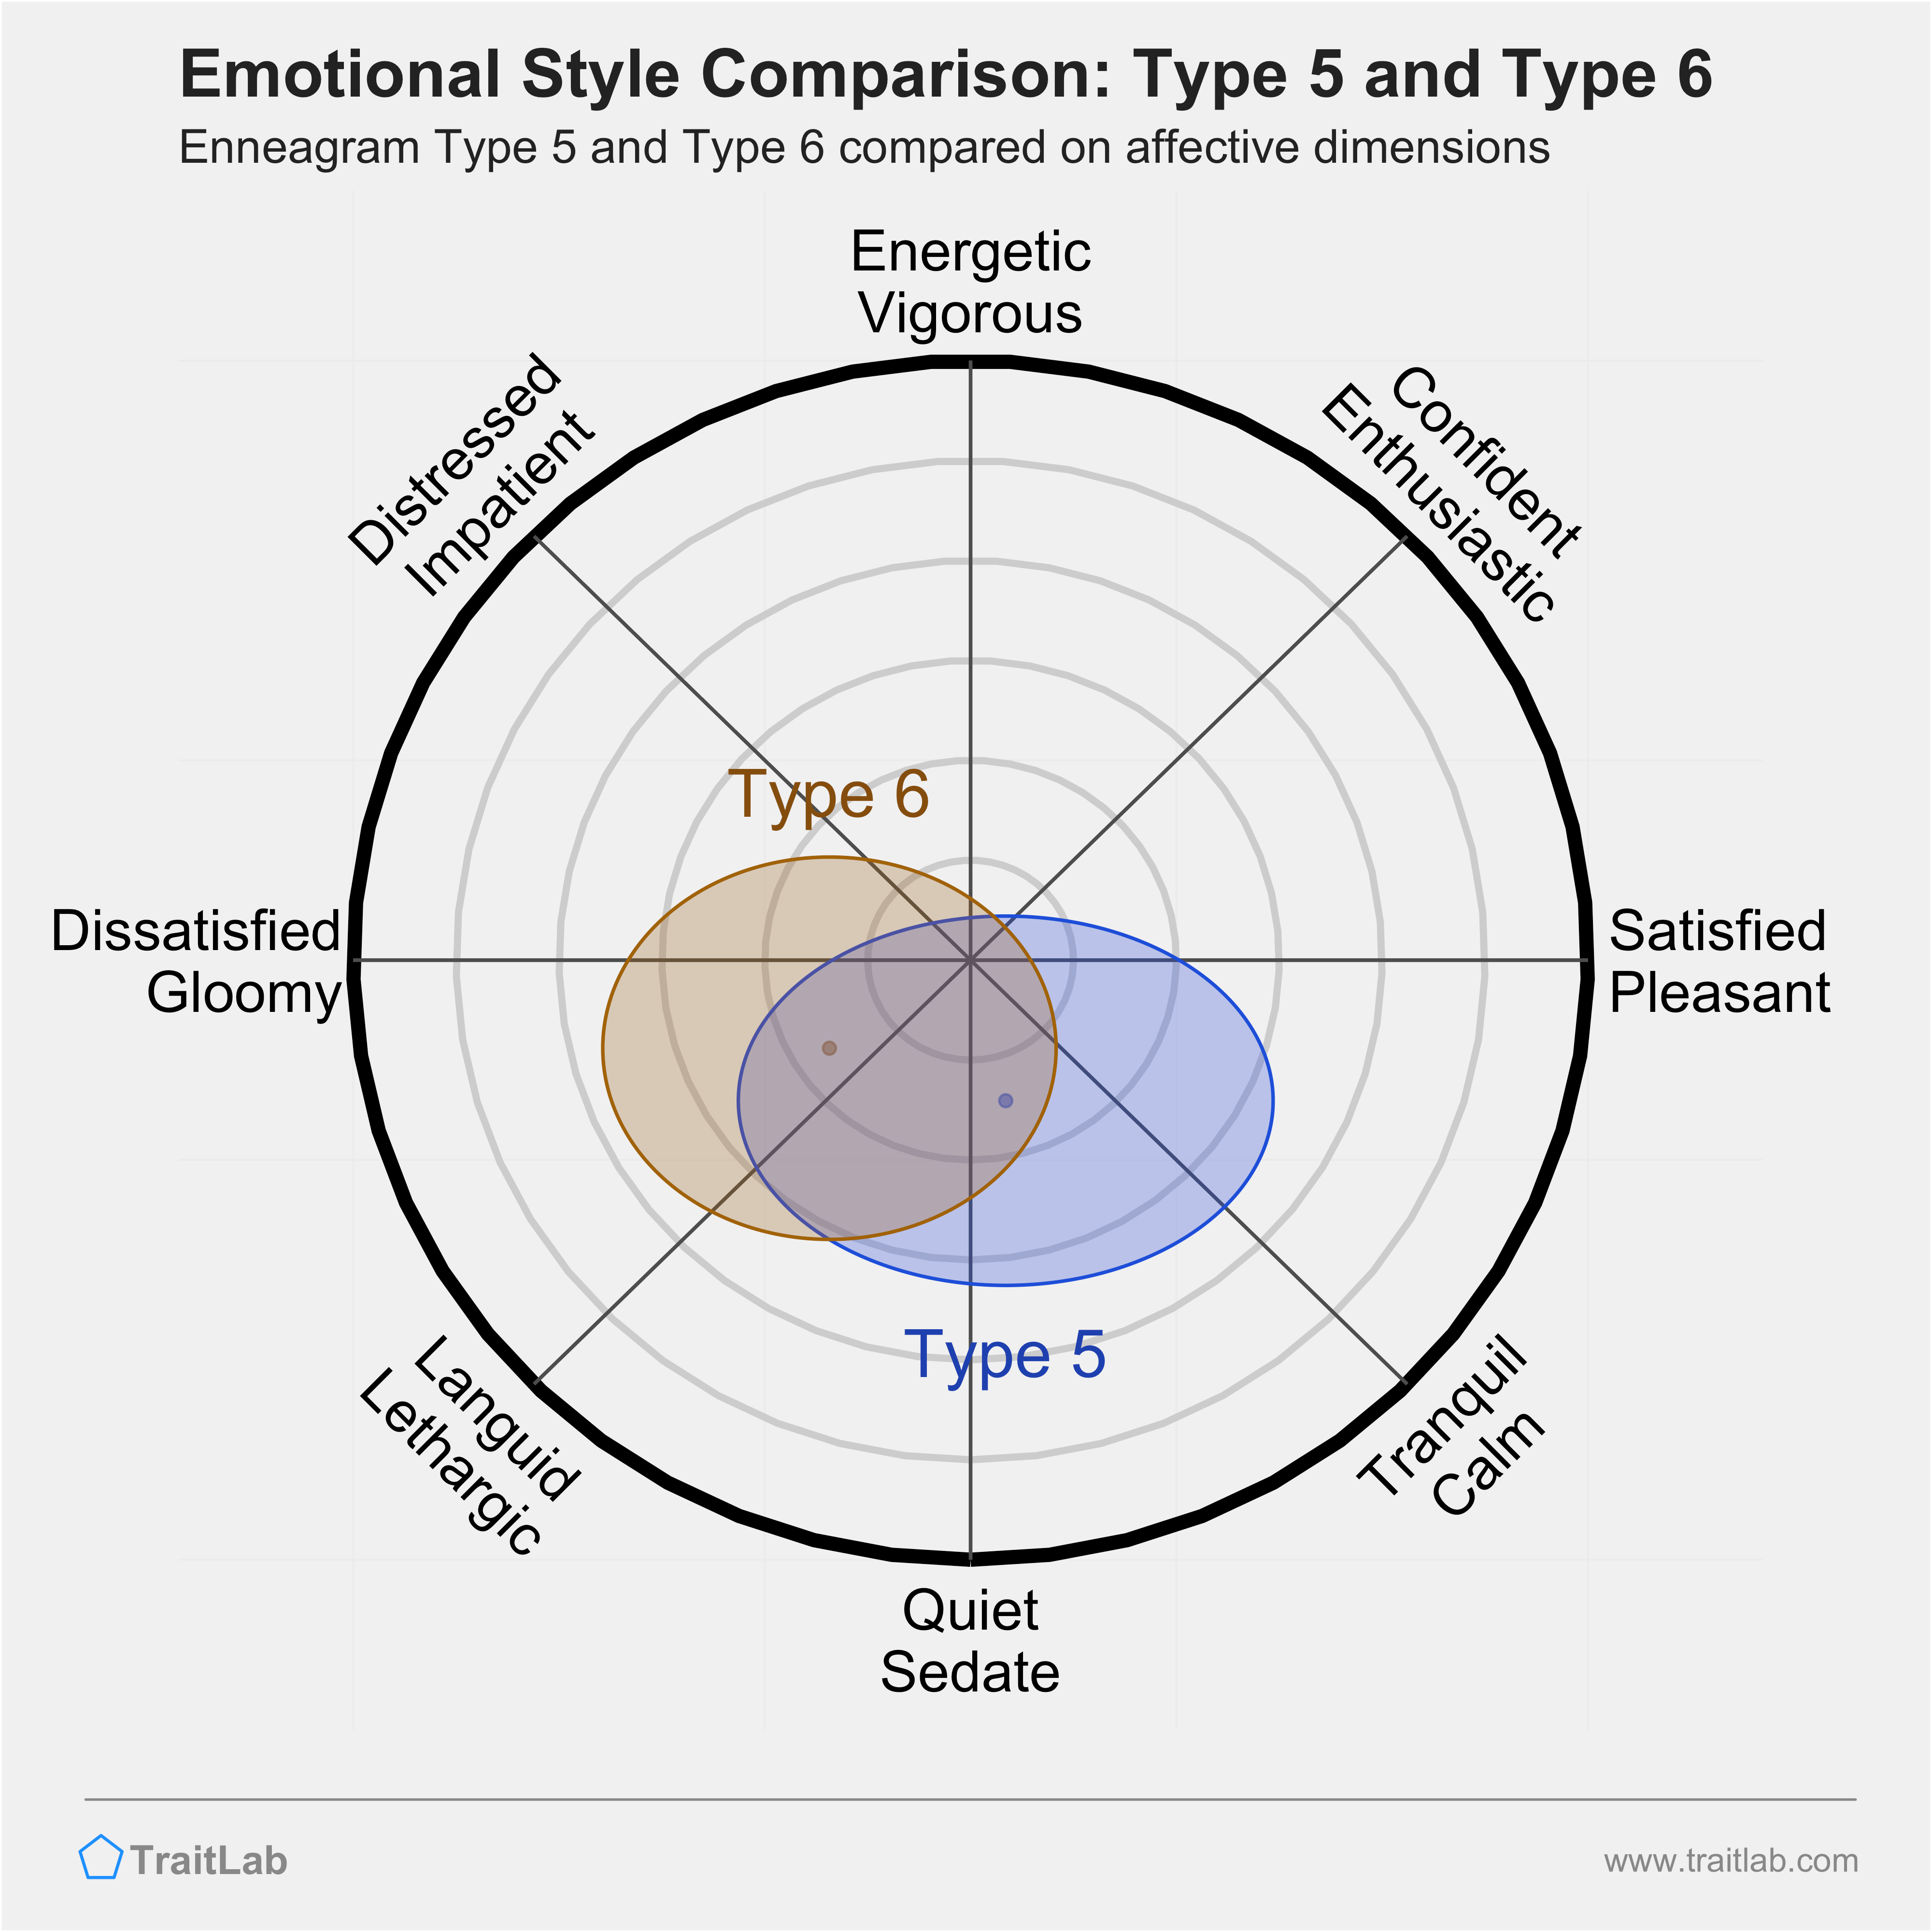 Type 5 and Type 6 comparison across emotional (affective) dimensions